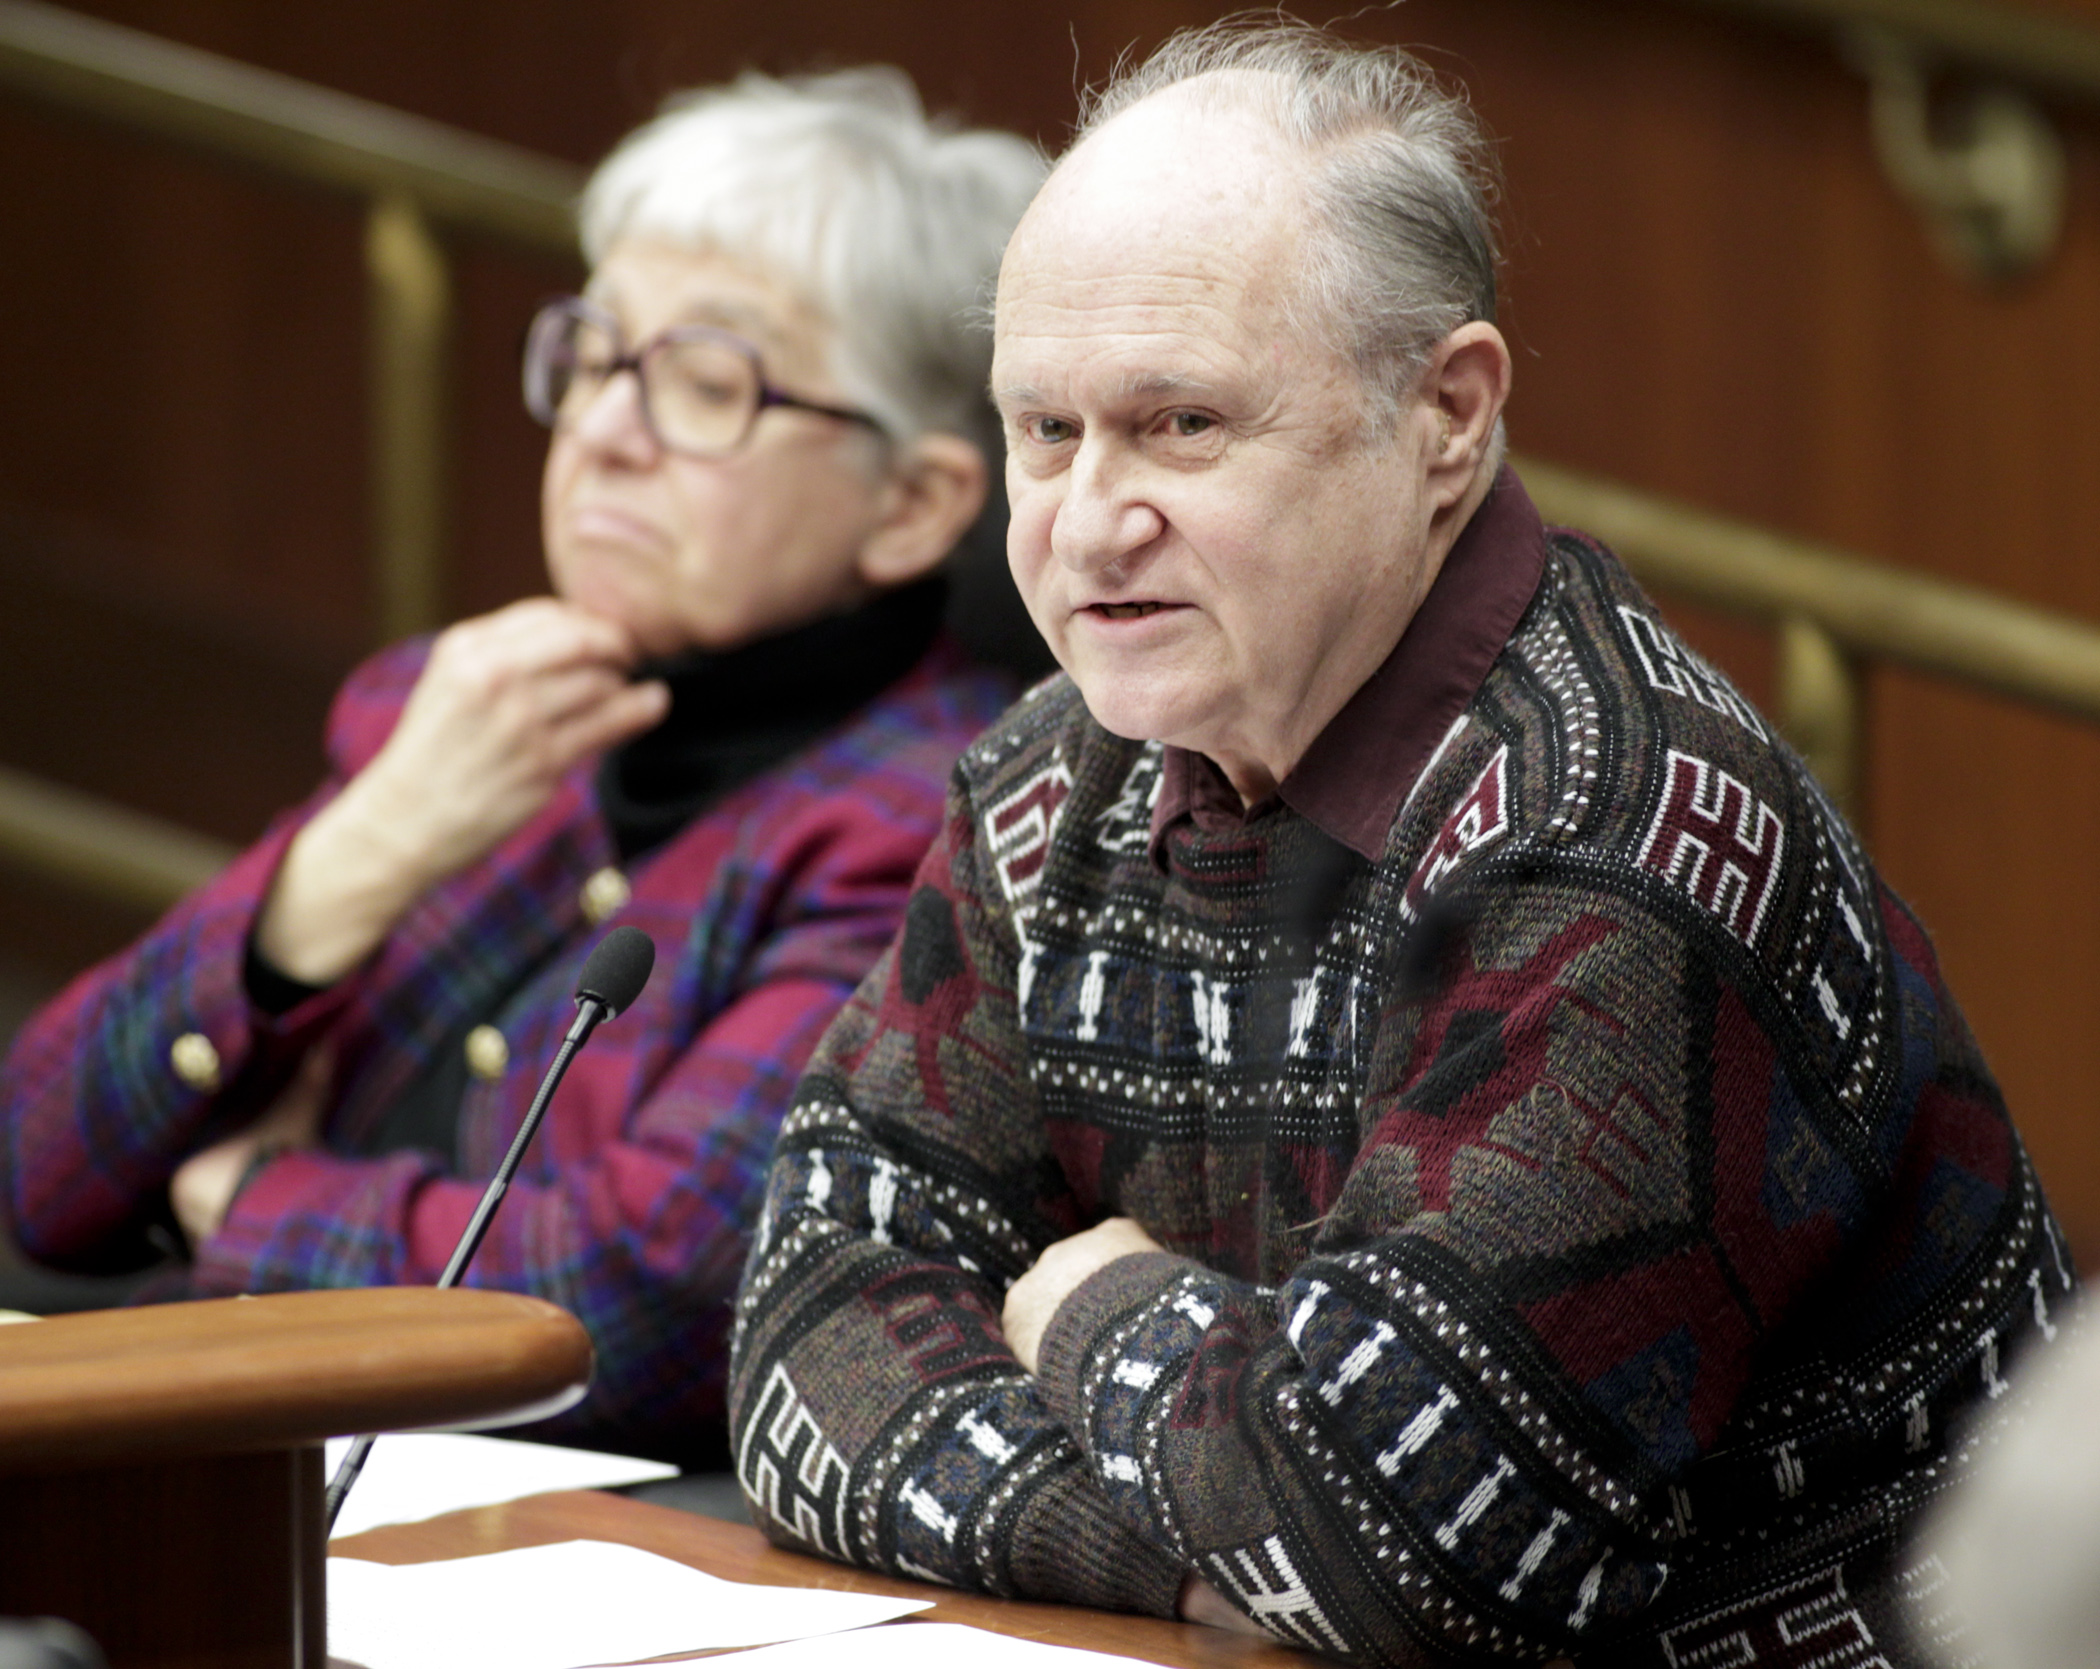 Chuck Boody, conductor of the Minnesota State Band, testifies on HF19 sponsored by Rep. Phyllis Kahn, left, which would provide funding for the band. Photo by Paul Battaglia